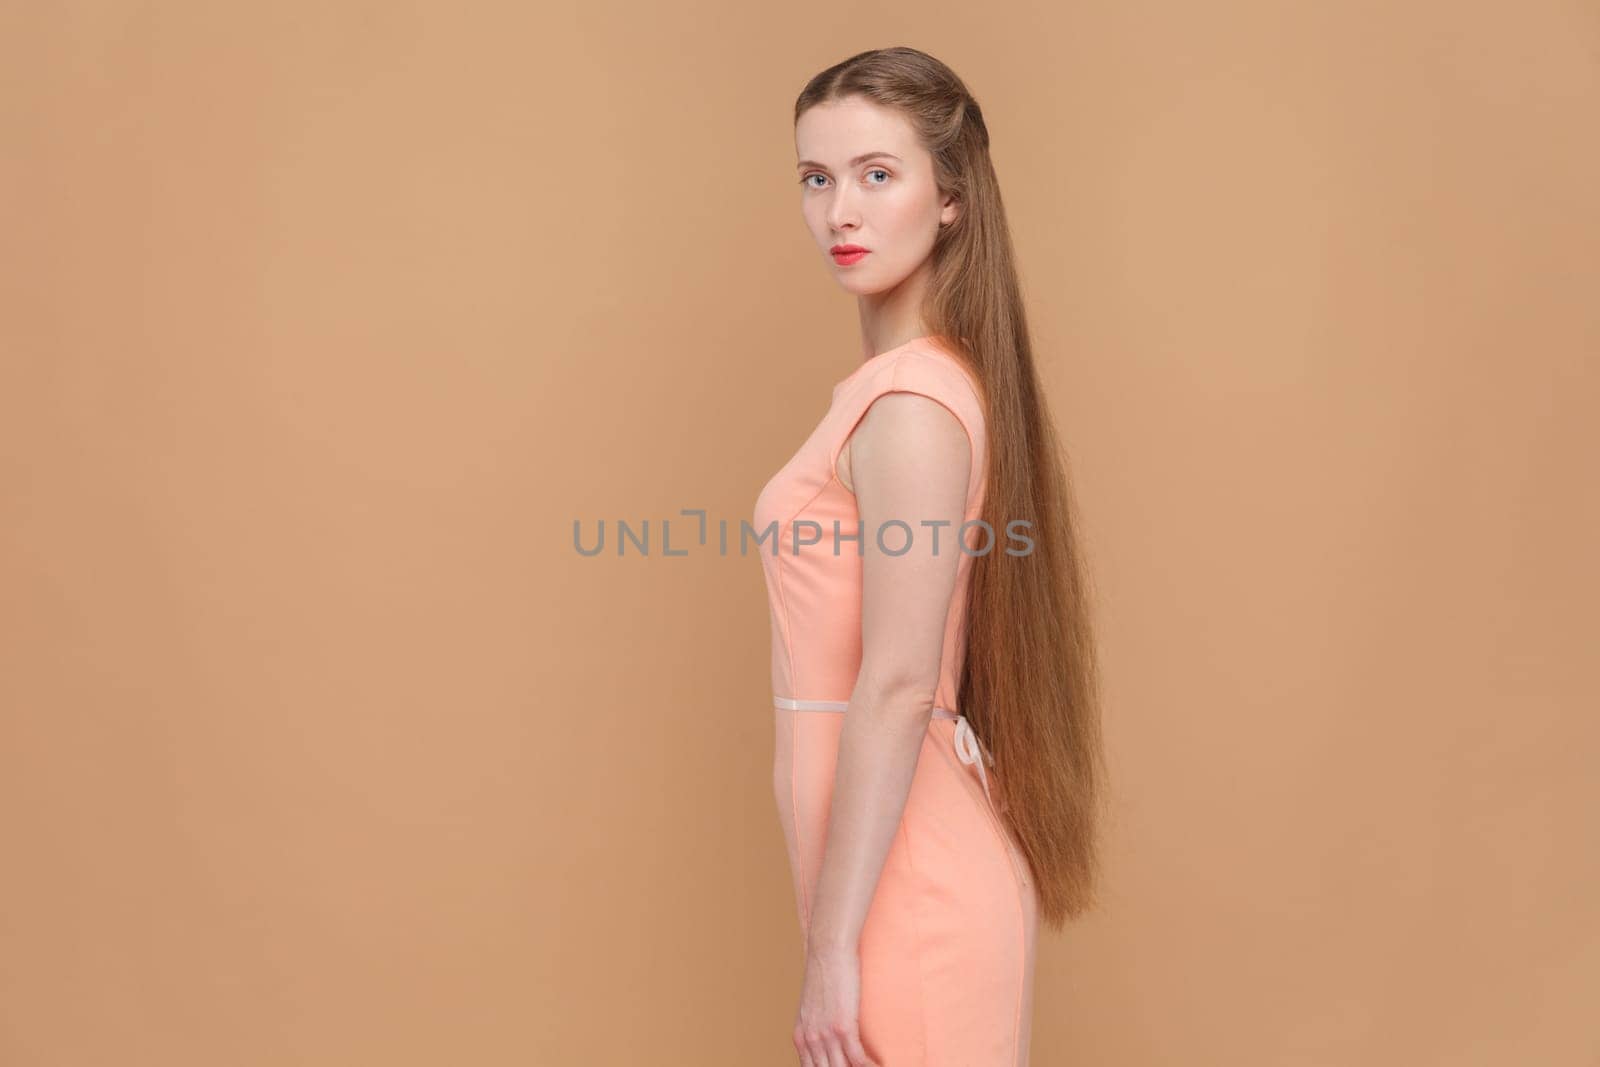 Side view portrait of serious strict woman with long hair looking at camera with bossy expression, being in bad mood, wearing elegant dress. Indoor studio shot isolated on brown background.